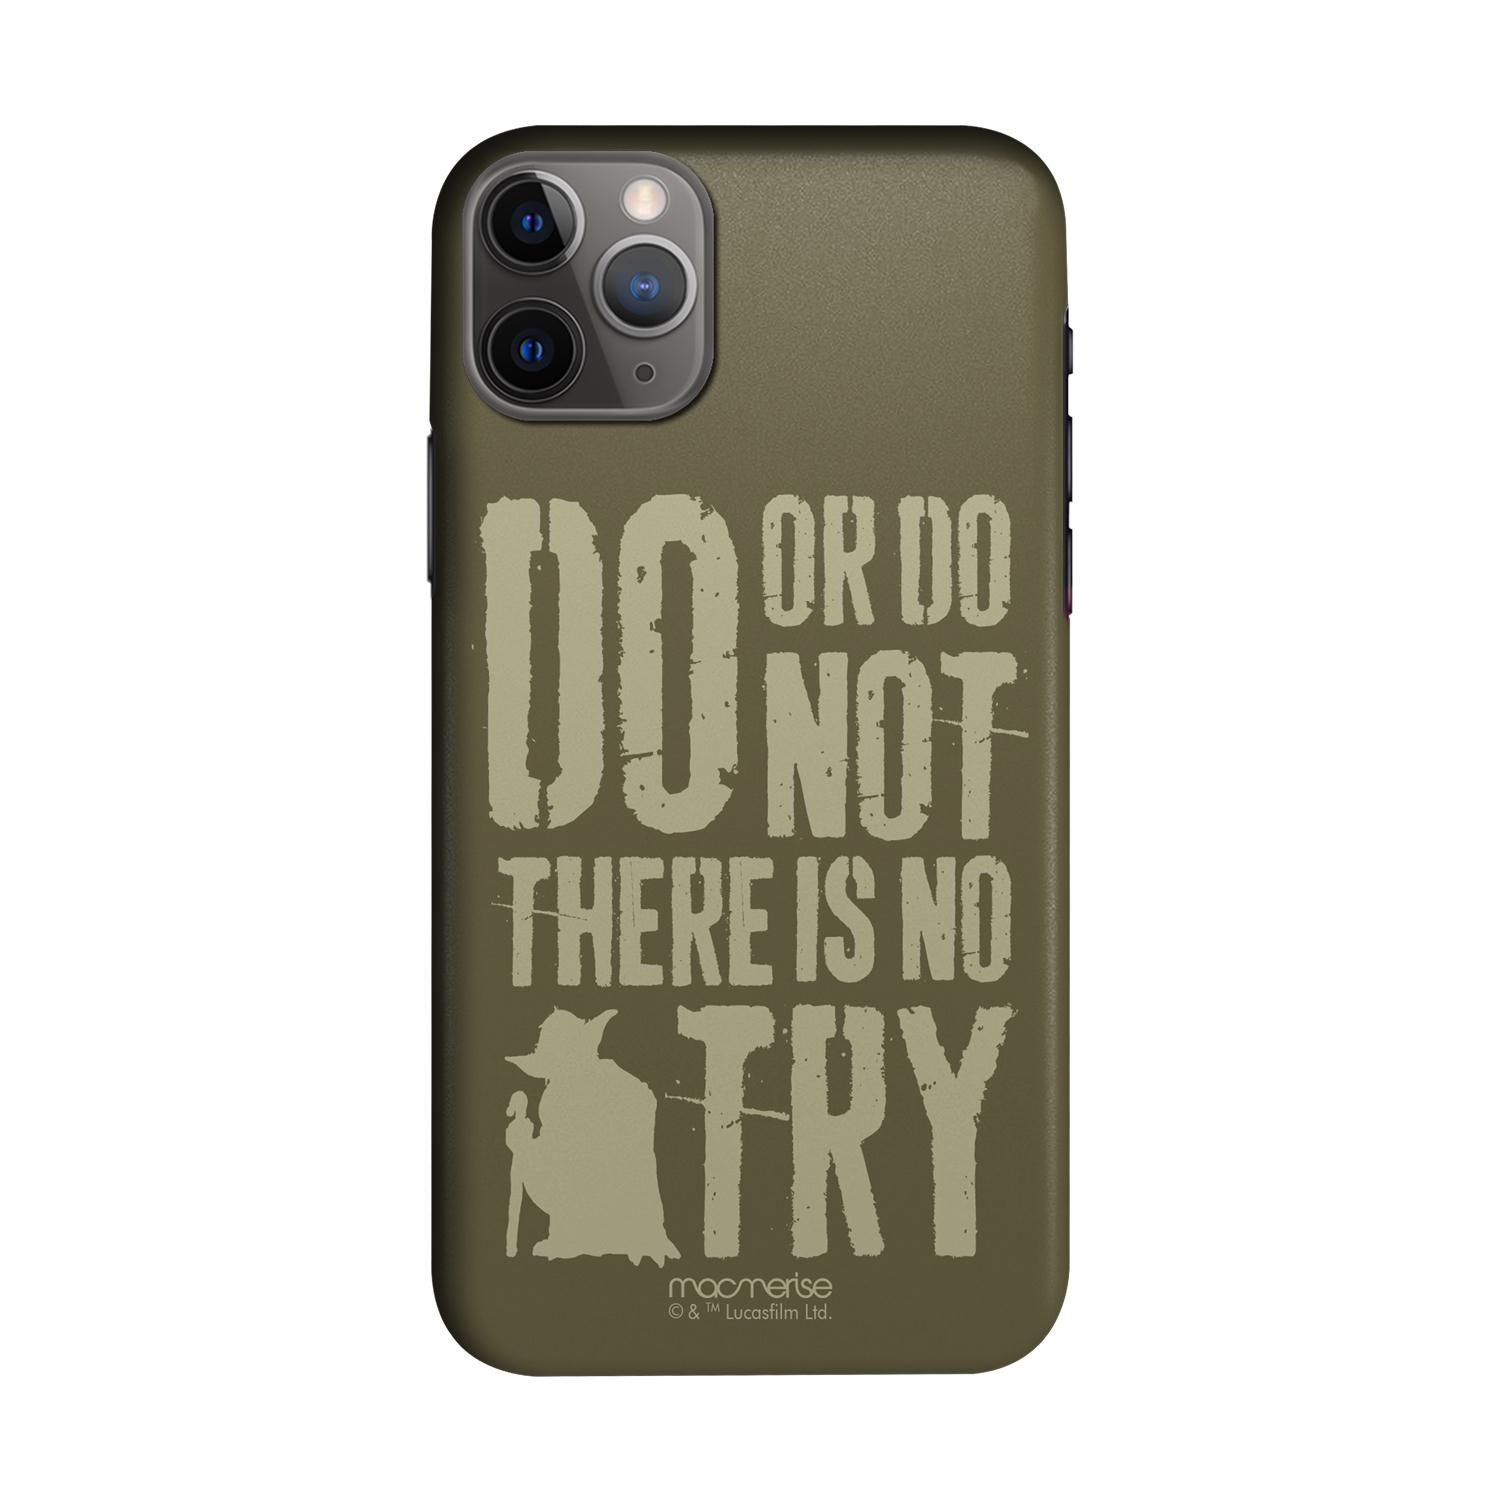 Buy Yoda Theory - Sleek Phone Case for iPhone 11 Pro Max Online